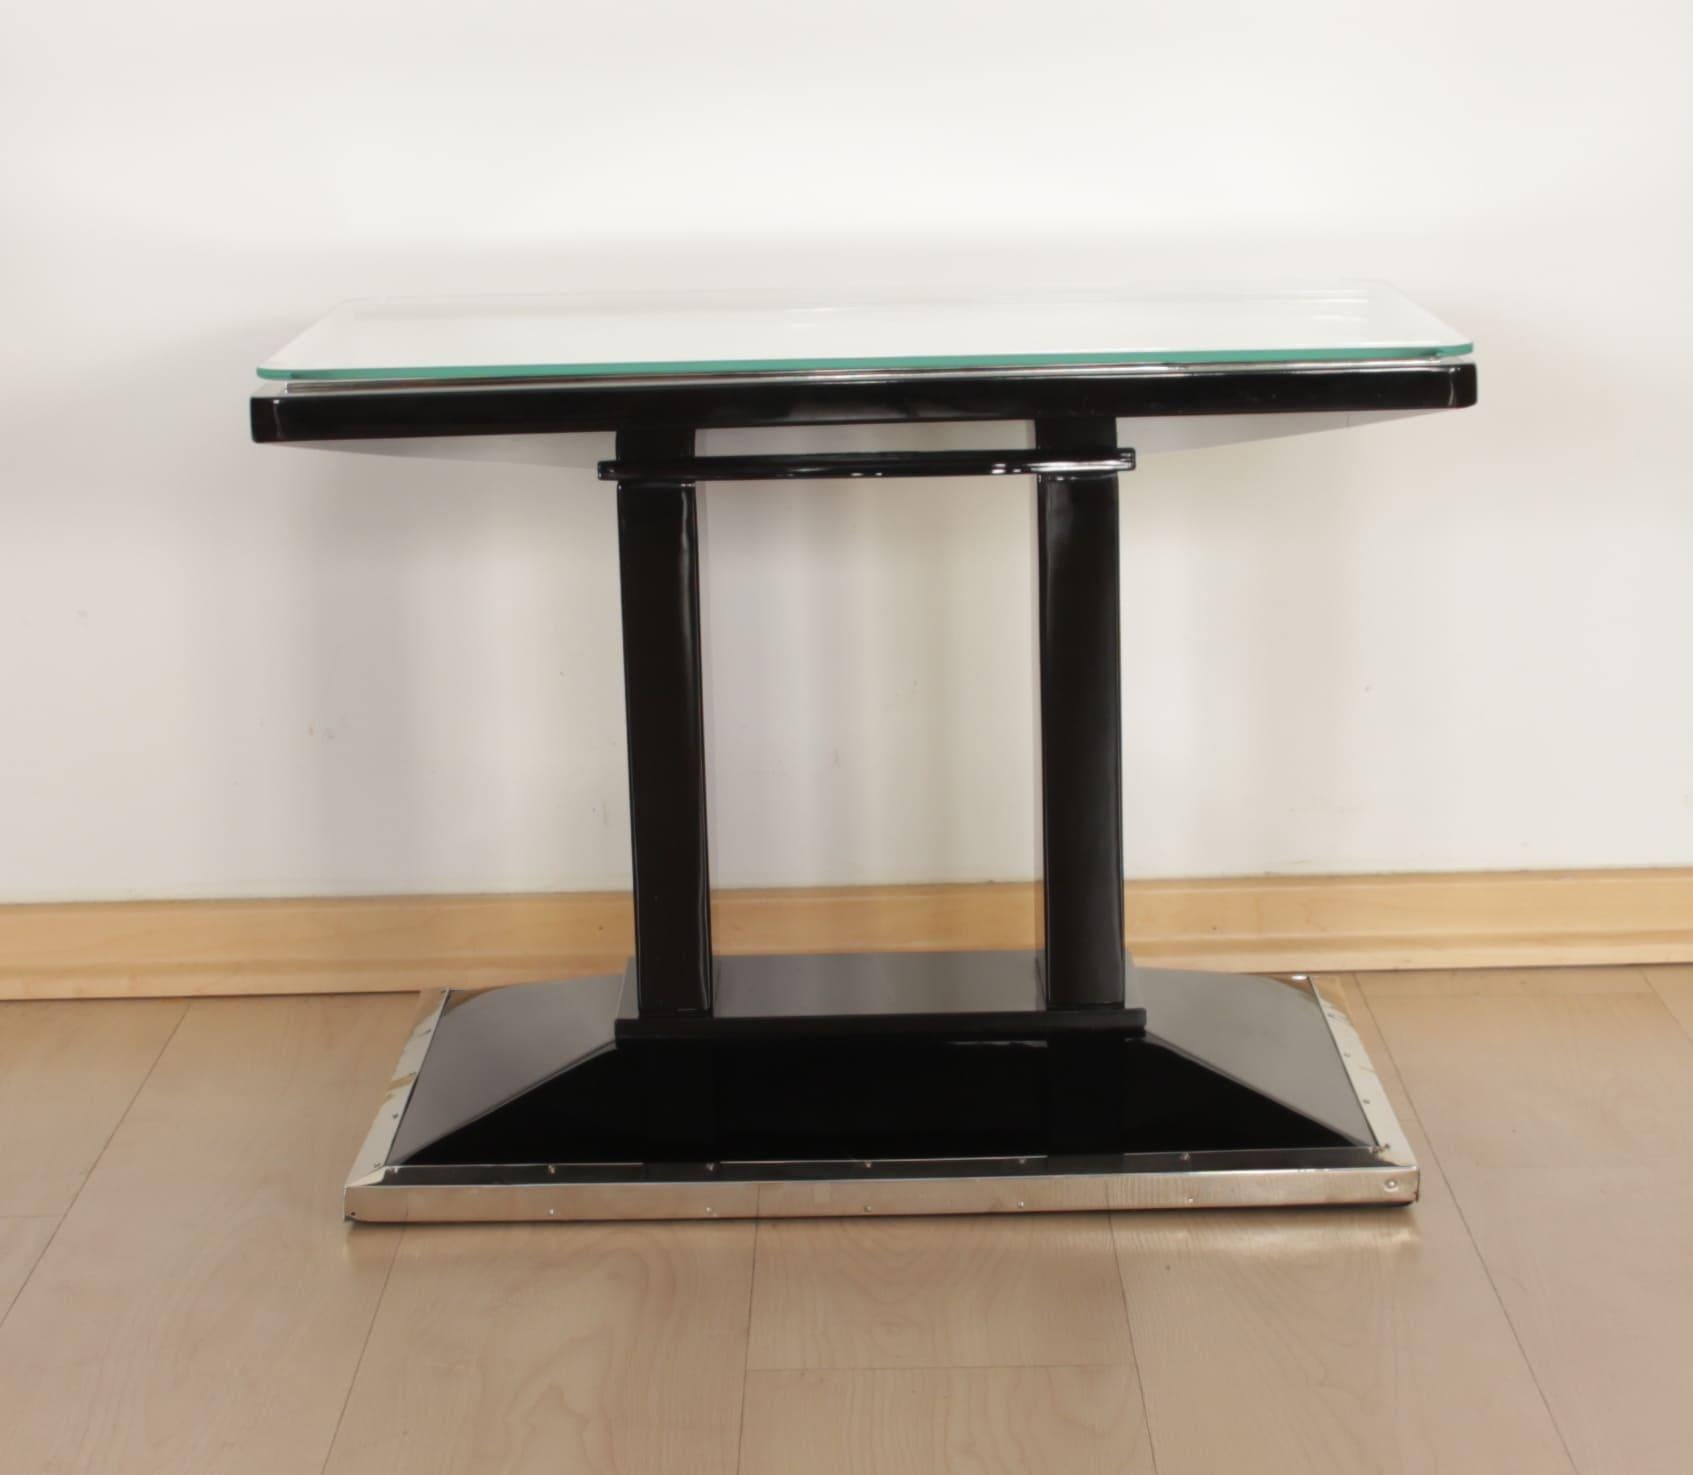 Early 20th Century Art Deco / Bauhaus Side Table, Black Lacquer, Chromed, Austria, circa 1920 For Sale